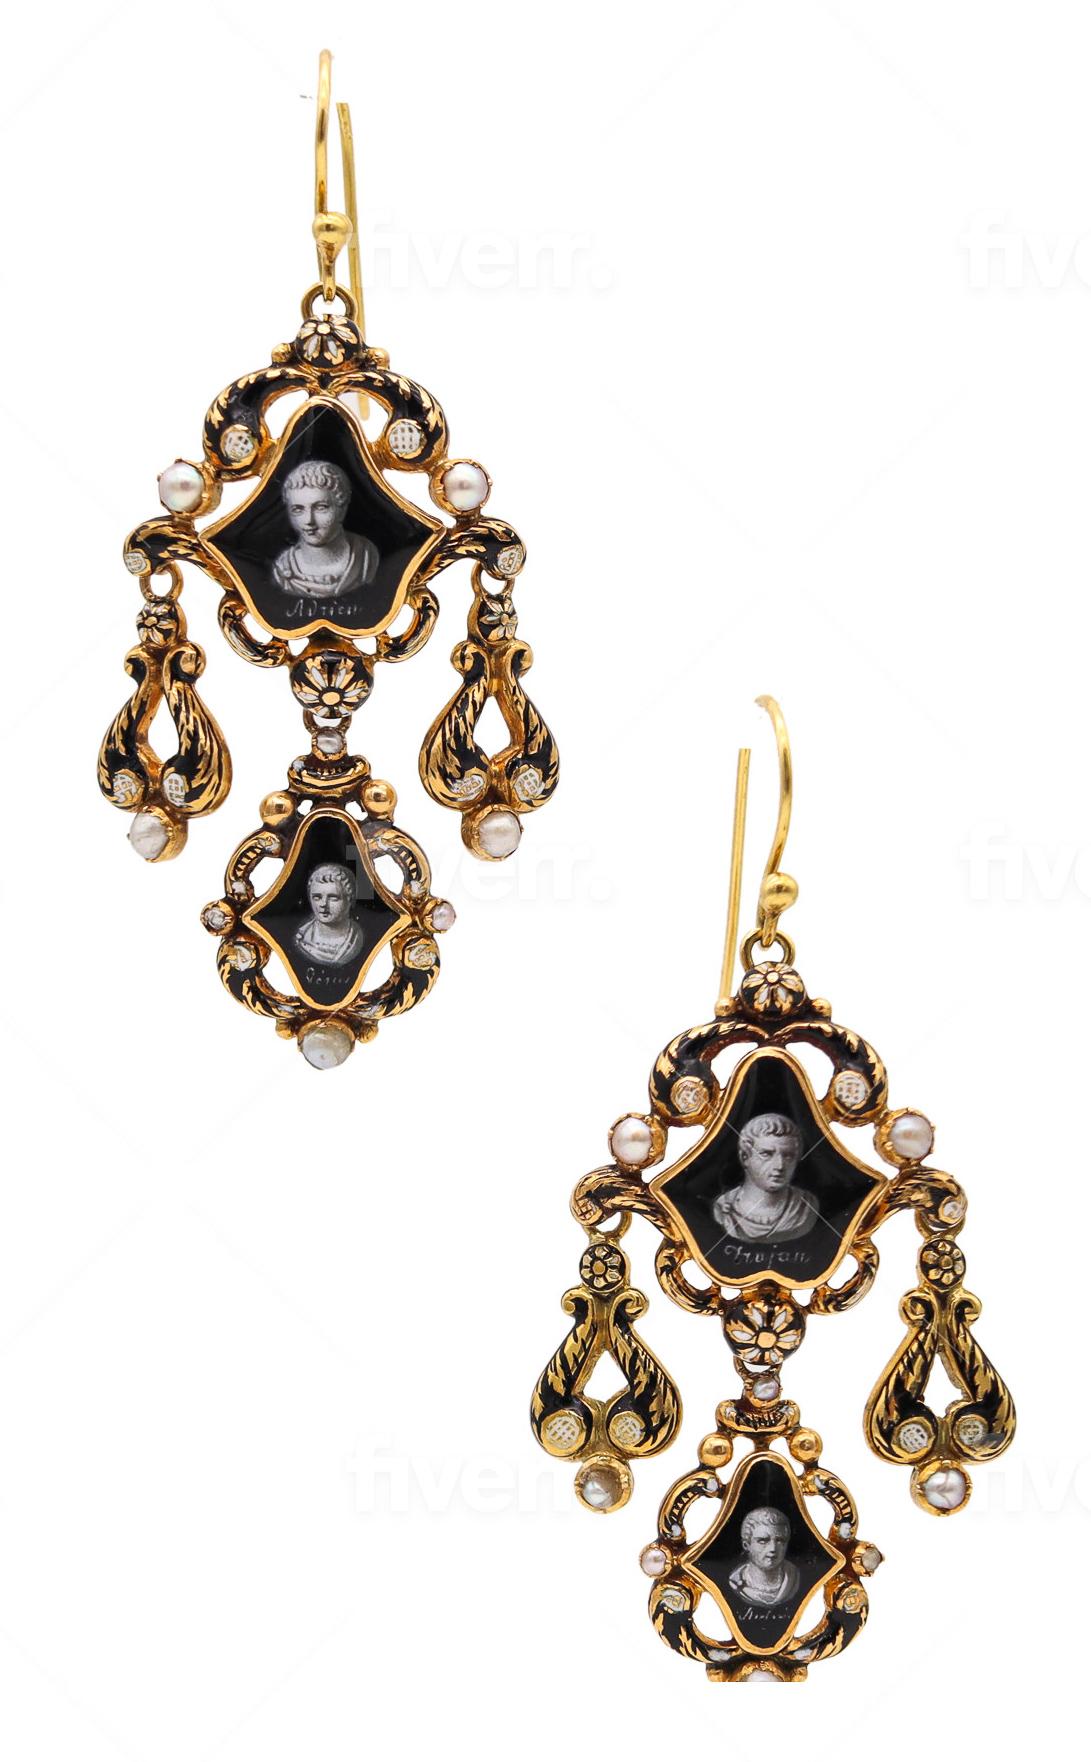 Exceptional Victorian Roman Revival earrings.

Very rare and highly decorated dangle drops earrings, created in Rome Italy during the Victorian and Grand Tour Era (1837-1901), circa 1850-1860. These fabulous dangle earrings has been carefully